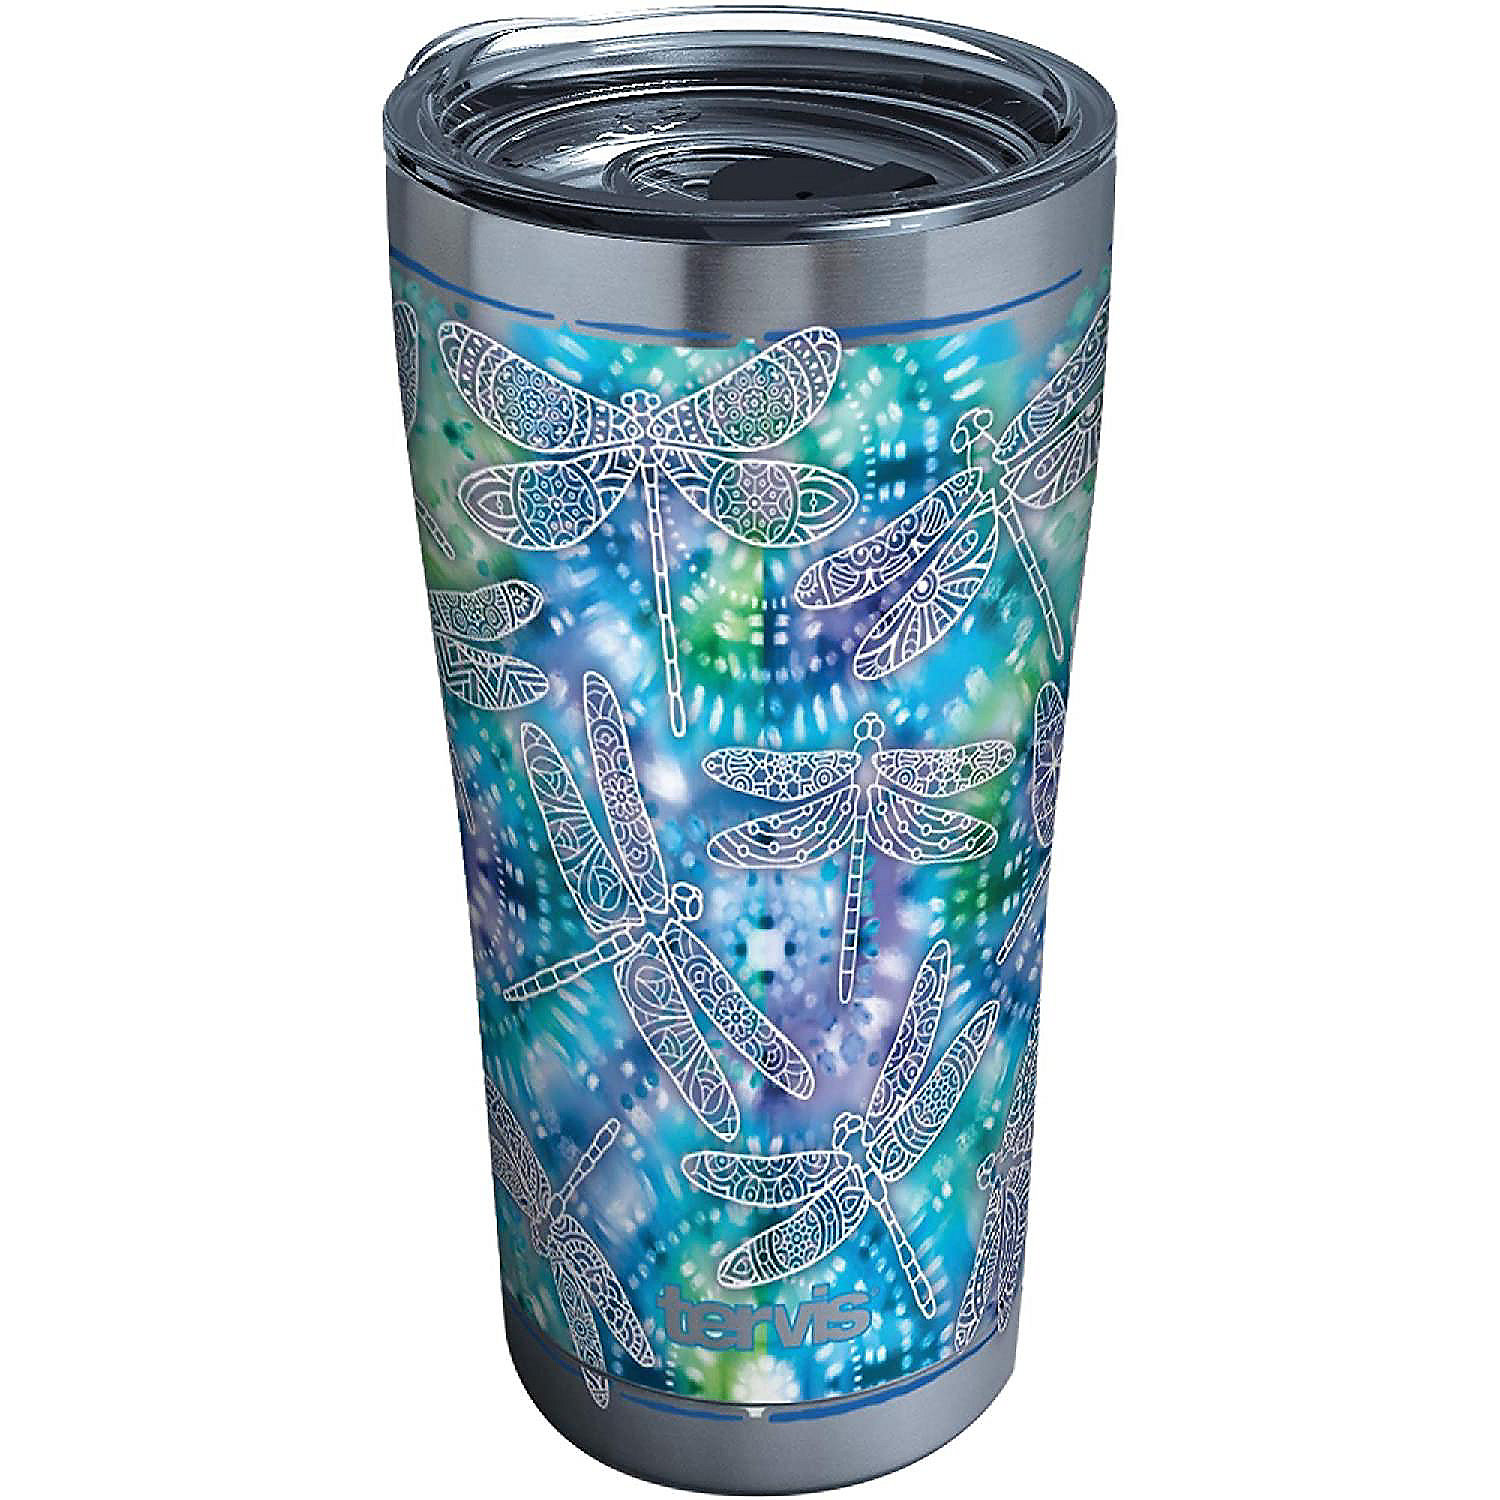 64HYDRO 20oz Dragonfly Mosaic Style Decorative Tumbler Cup with Lid Double Wall Vacuum Sporty Thermos Insulated Travel Coffee Mug 